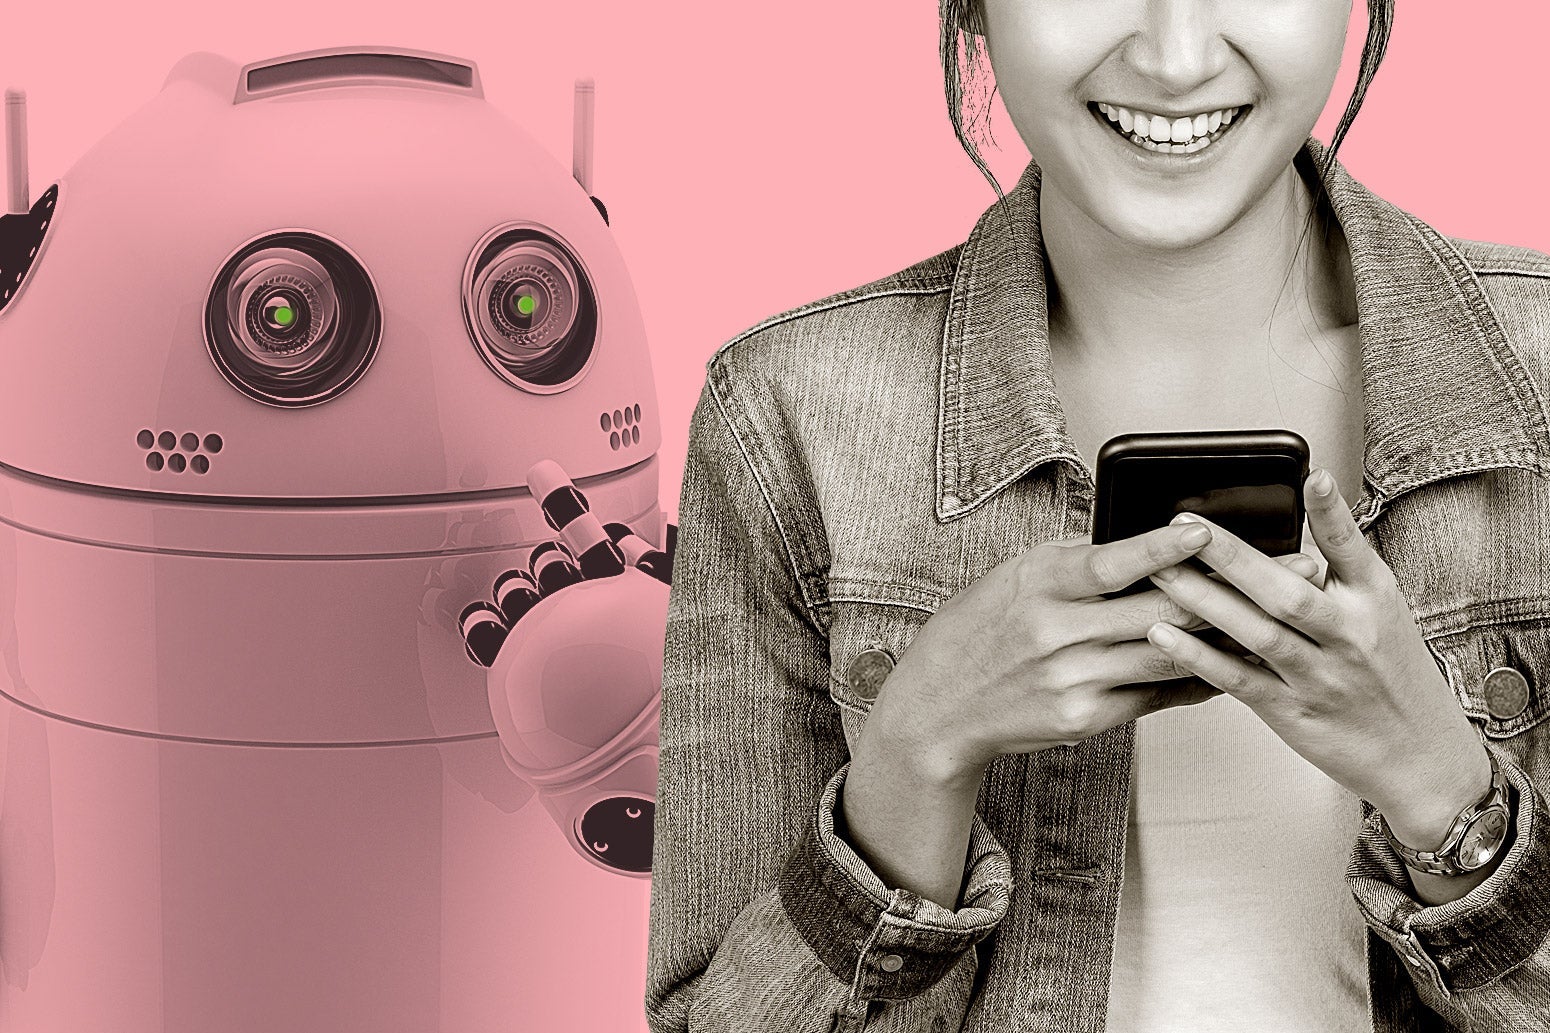 A woman smiles as she looks at her phone, while a robot looks over her shoulder.